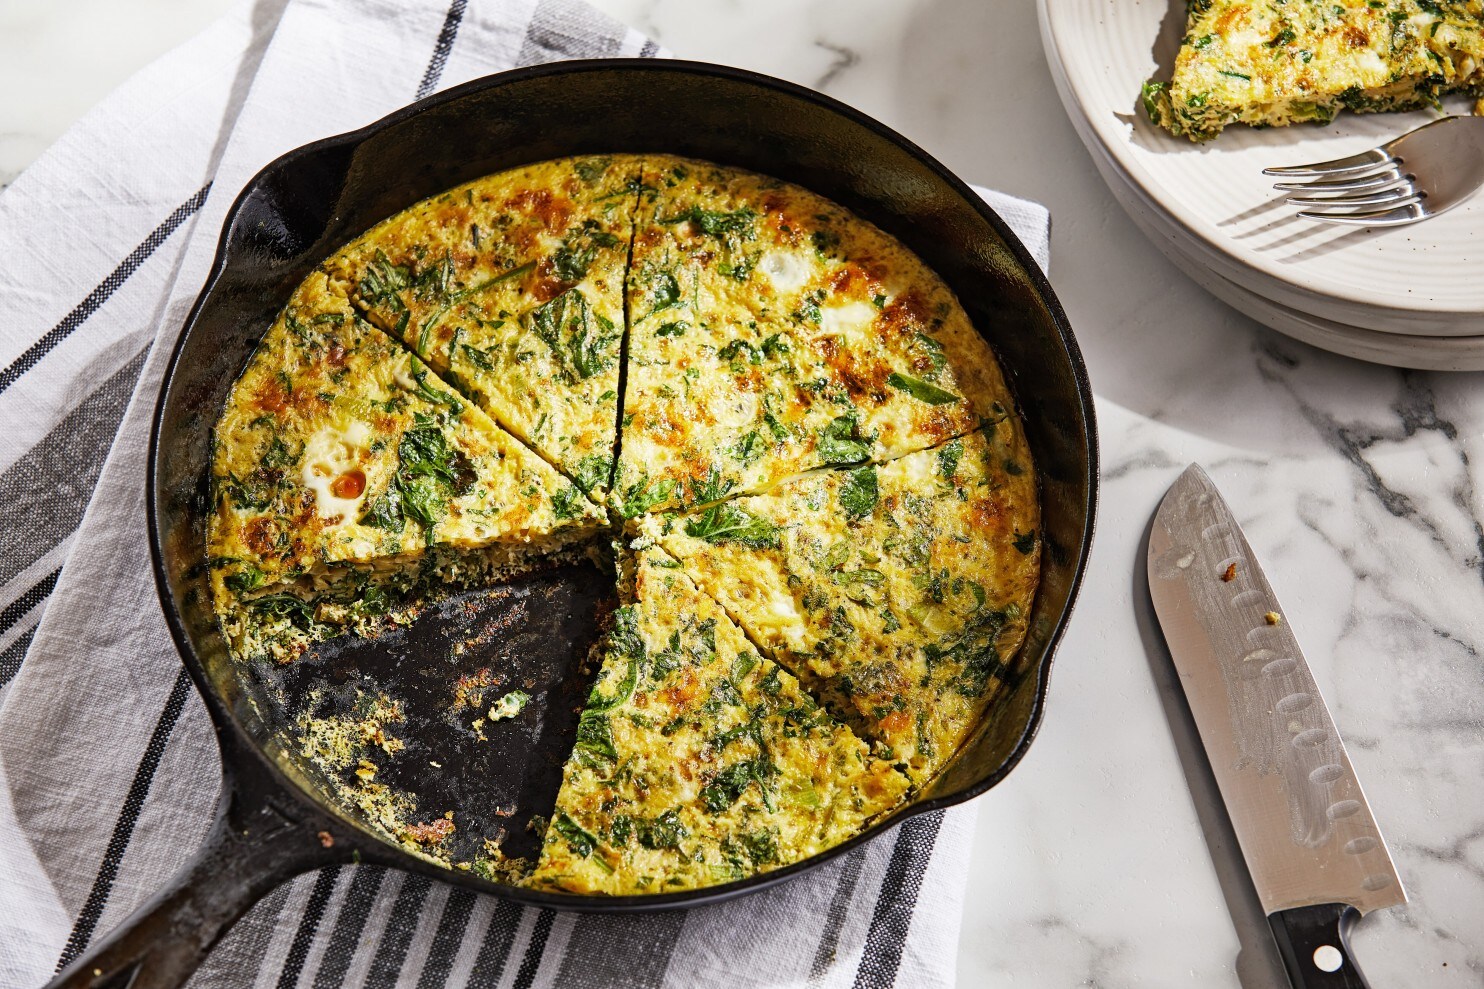 Green Frittata With Leeks, Kale and Parsley